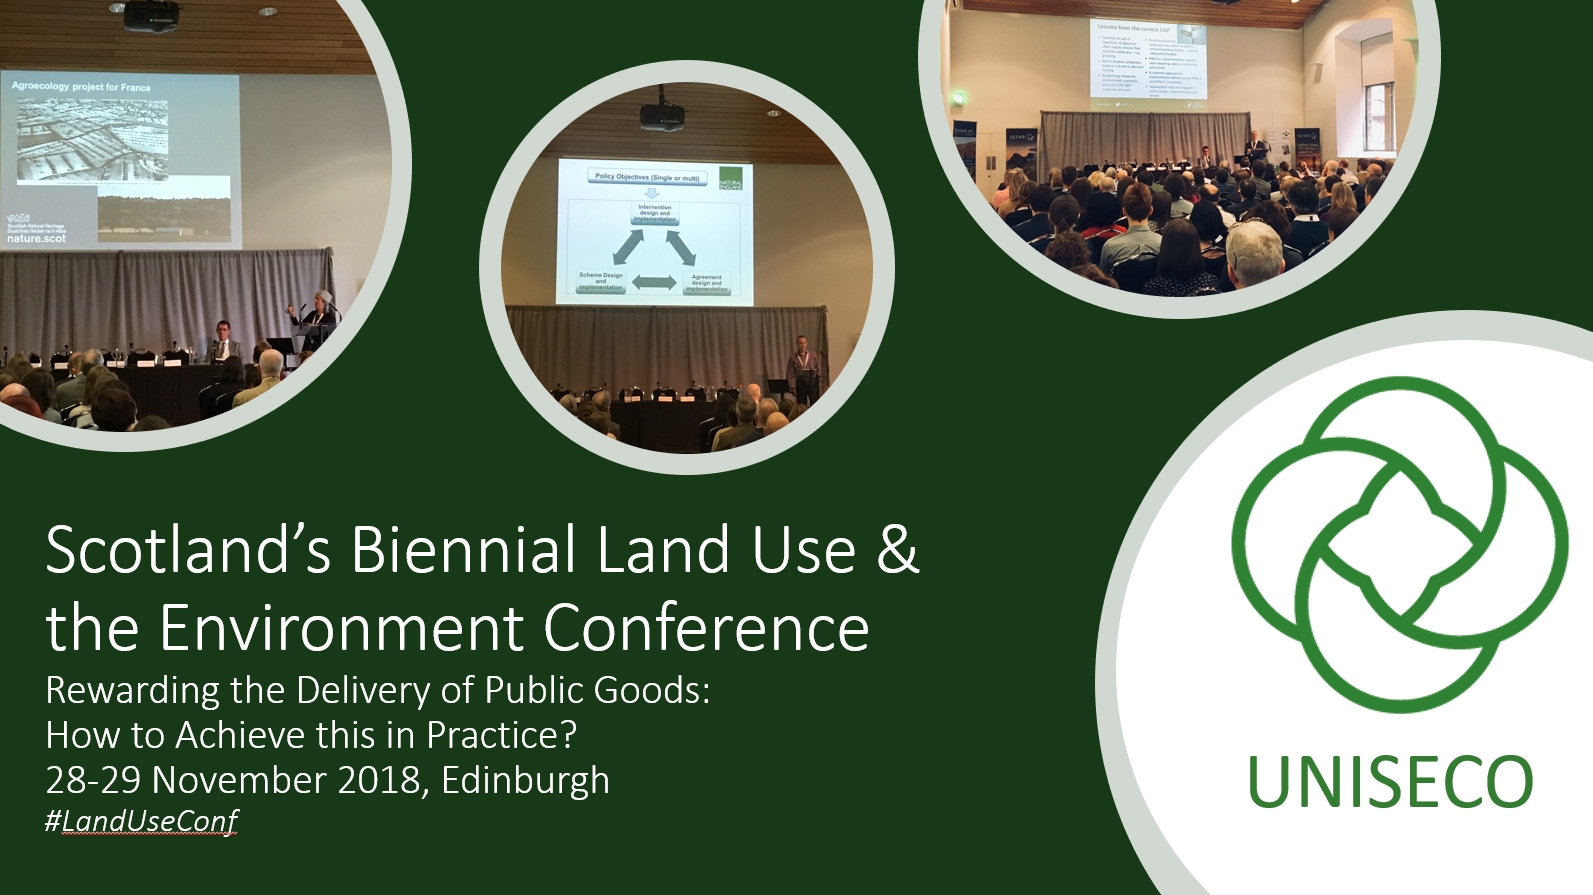 UNISECO presented at Scotland’s Biennial Land Use & the Environment Conference